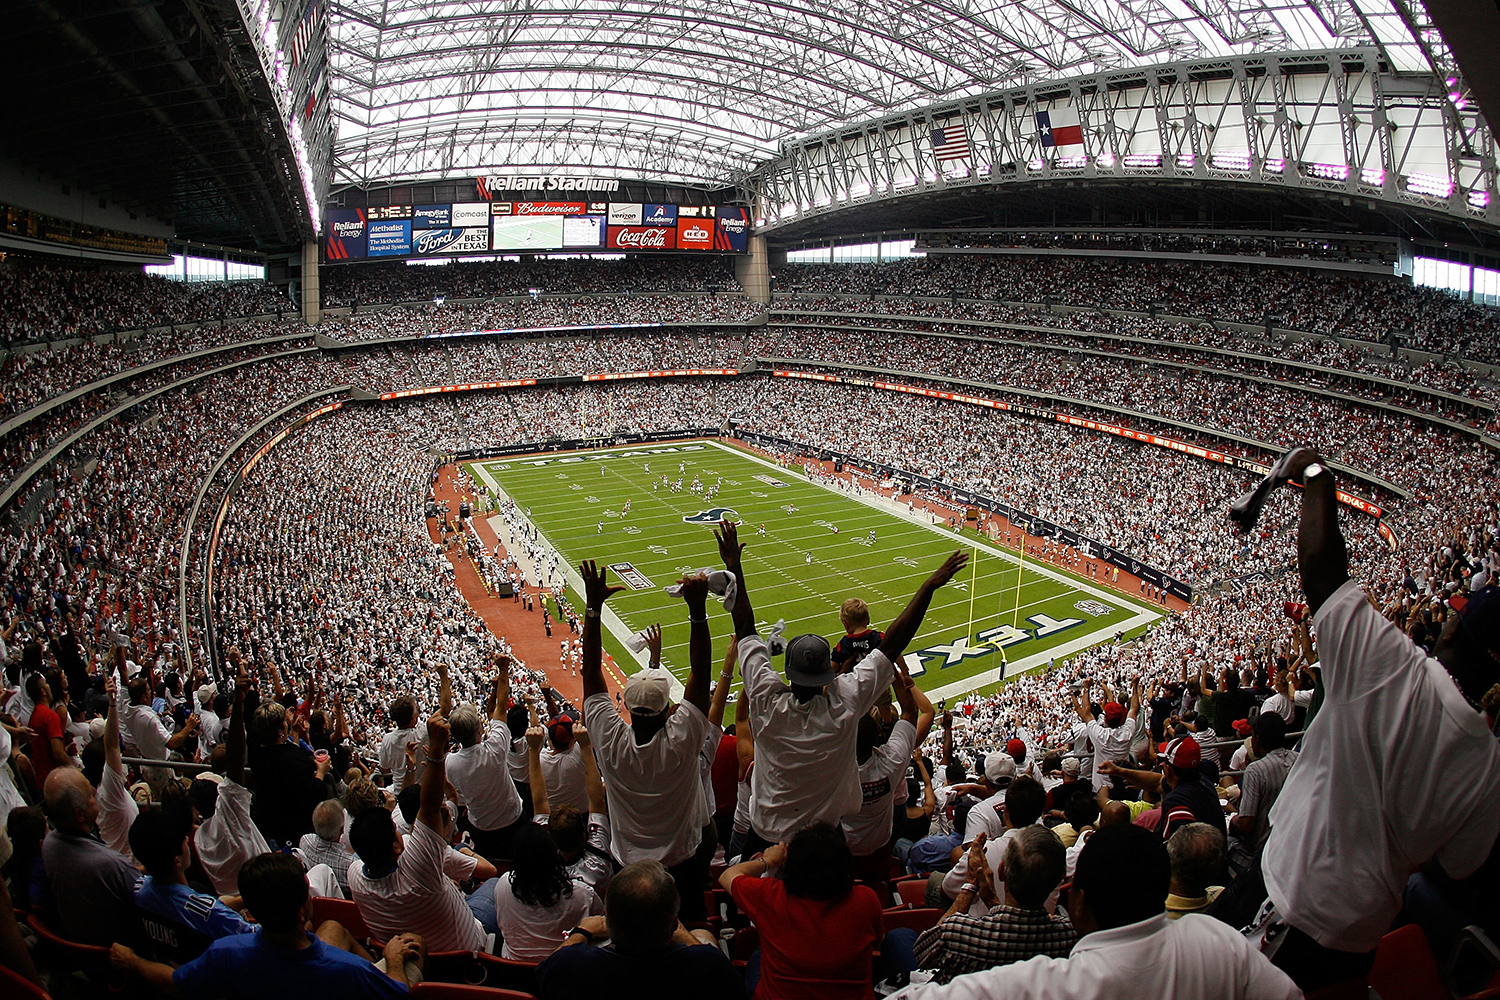 Fans celebrate a touchdown at NRG Stadium, formerly Reliant Stadium, in Houston, Texas. (Chris Graythen/Getty Images)